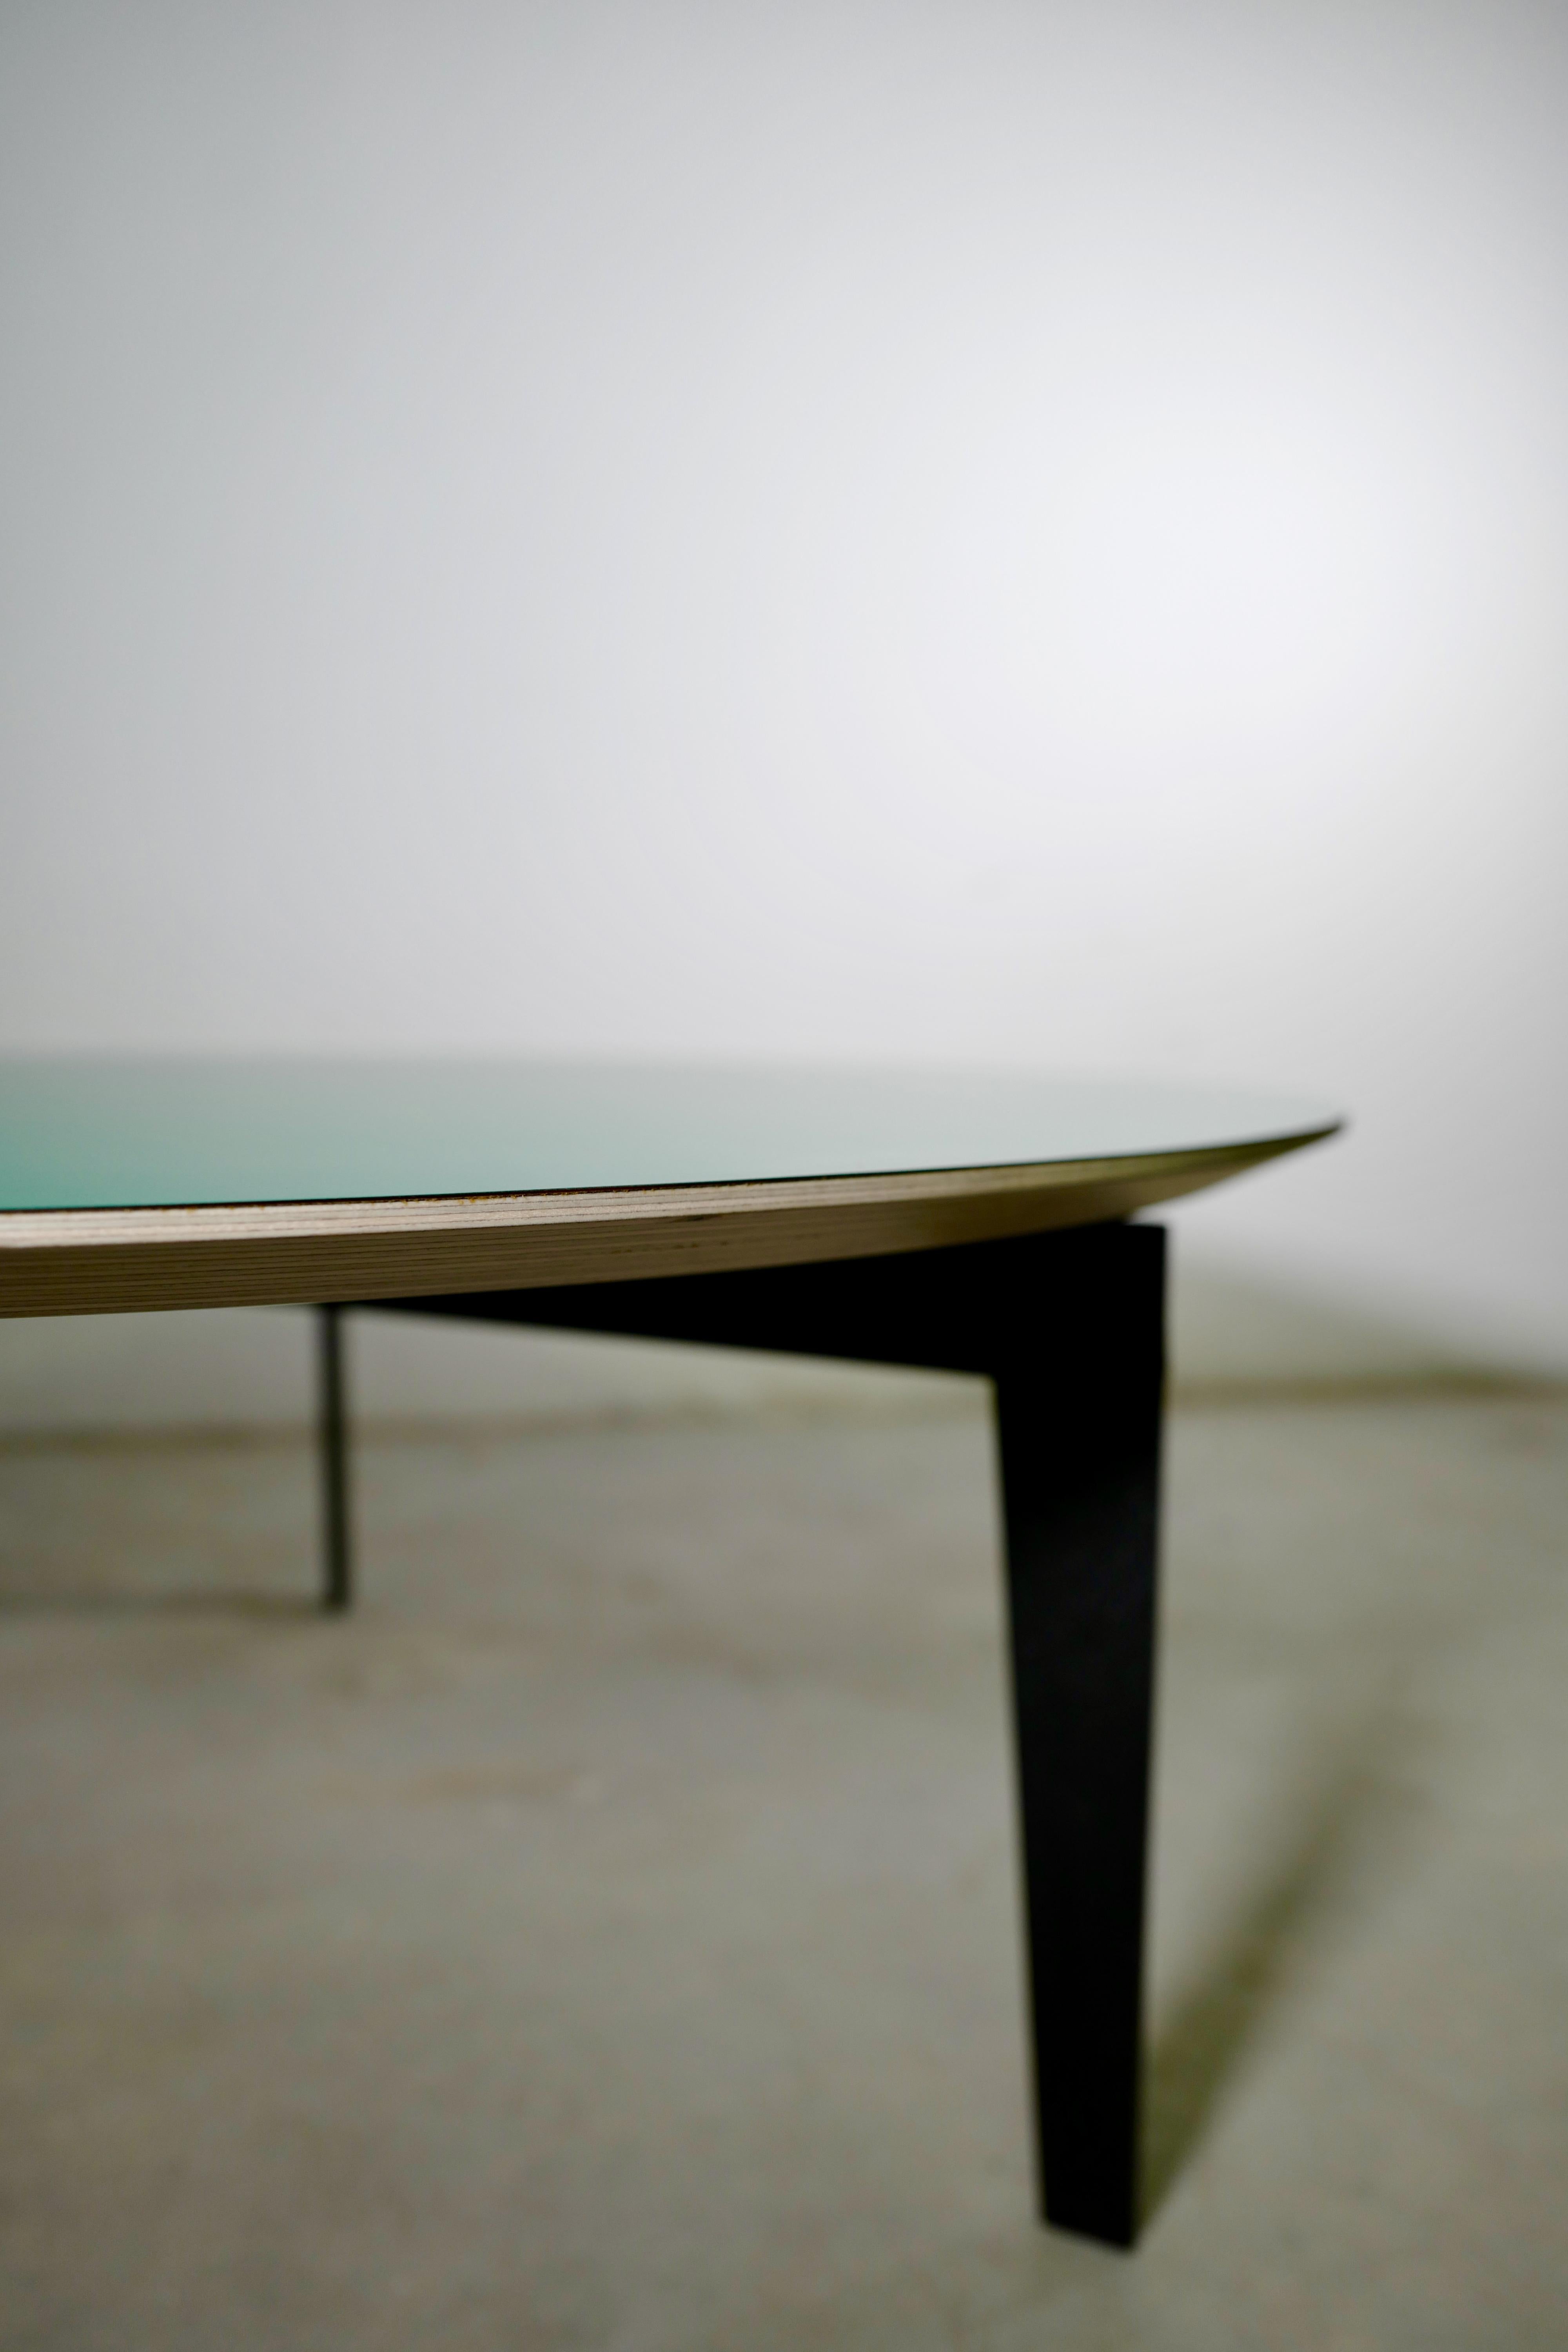 A cheerful and large contemporary italian round coffee and center table with 24 mm birch plywood and 1 mm matt plastic laminate top. The legs and frame are made in powder-coated iron with a black embossed finish. The table top is available in four